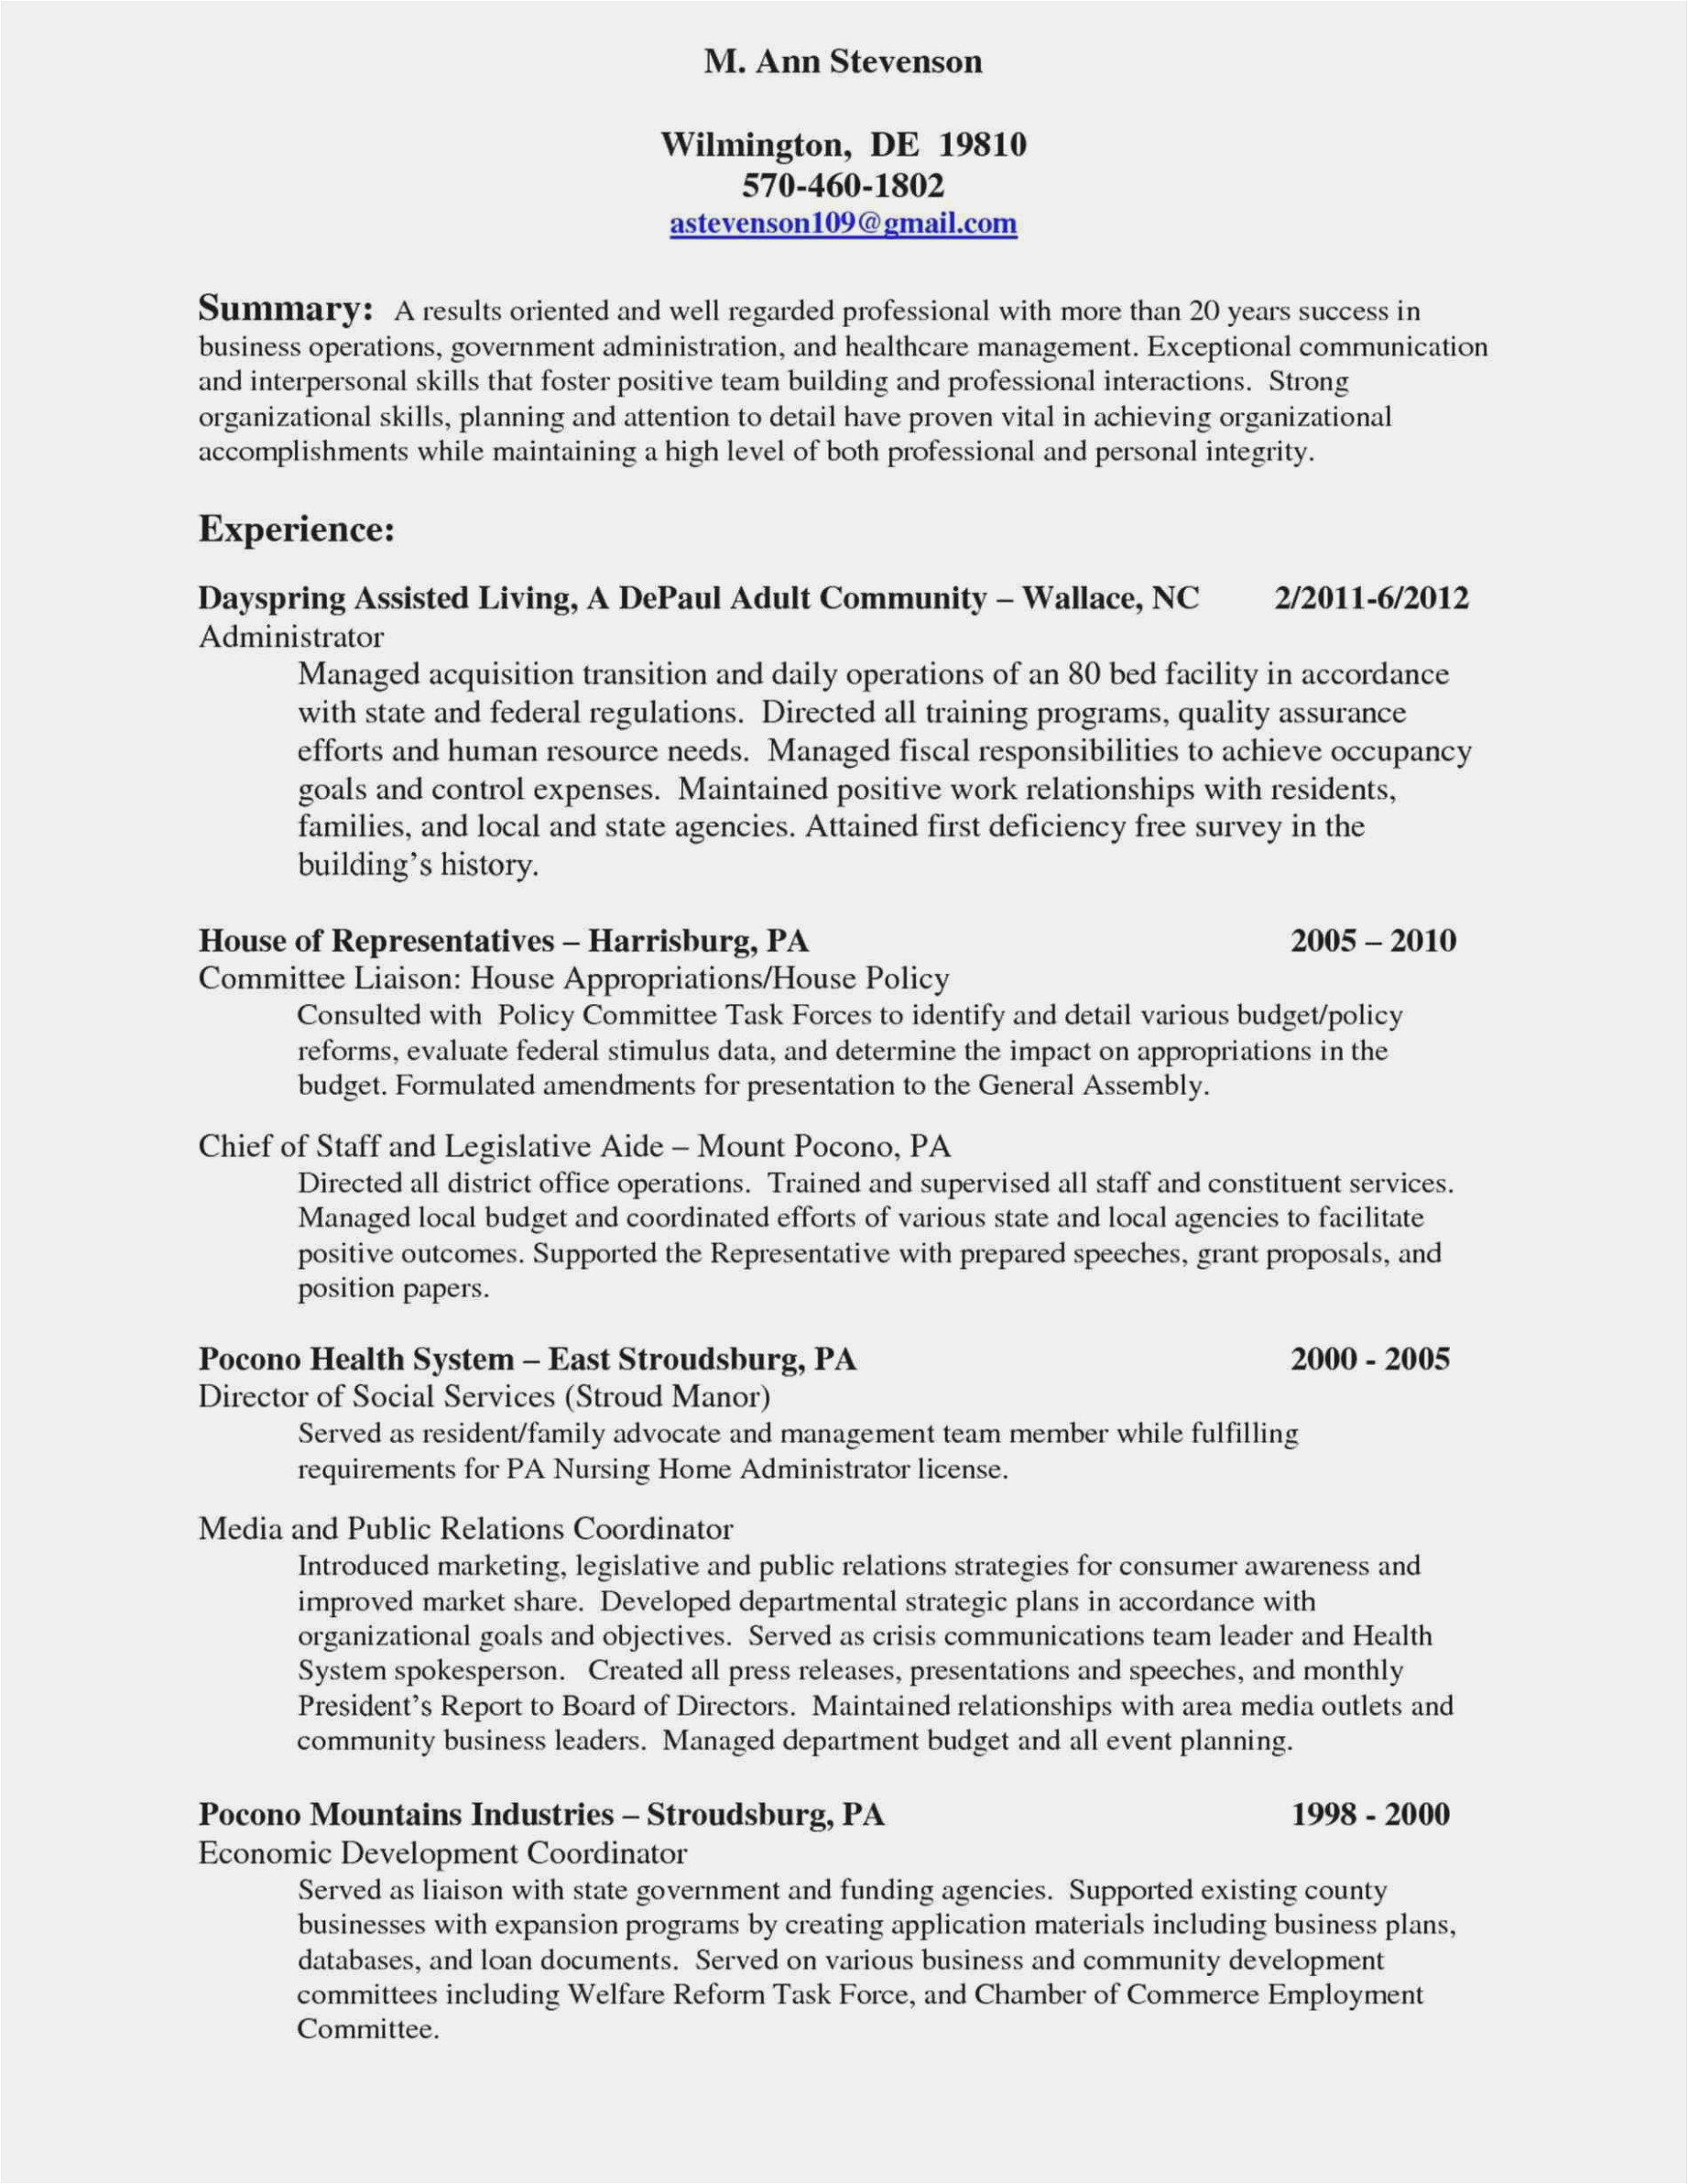 Sample Resume for Nonprofit Board Position Seven Things You Probably Didn’t Know About Executive